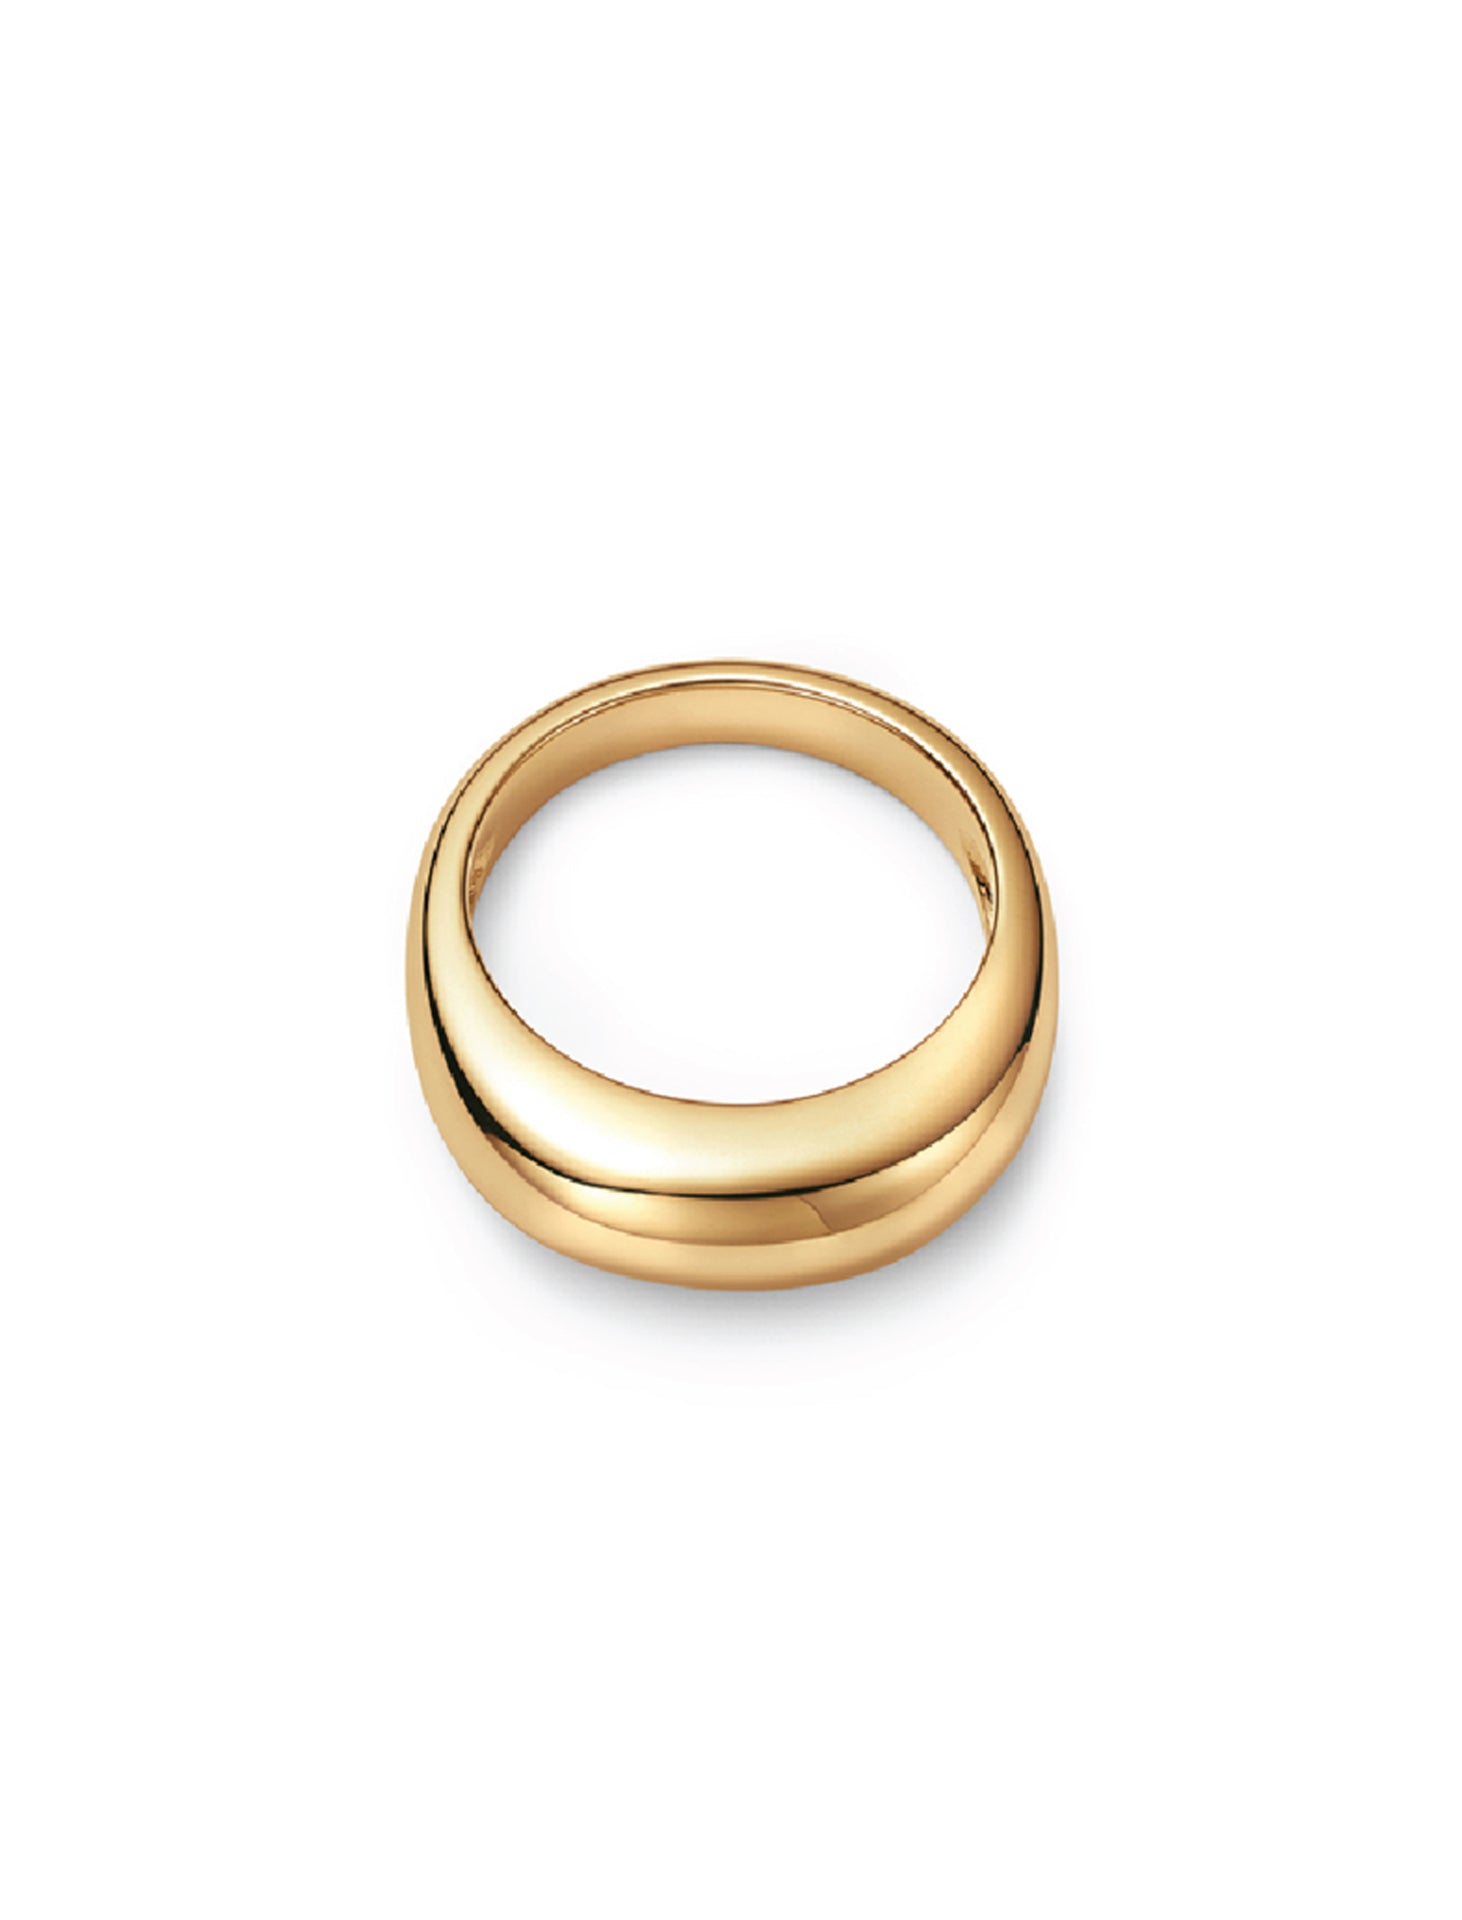 Vaulted, 18K Yellow Gold Ring